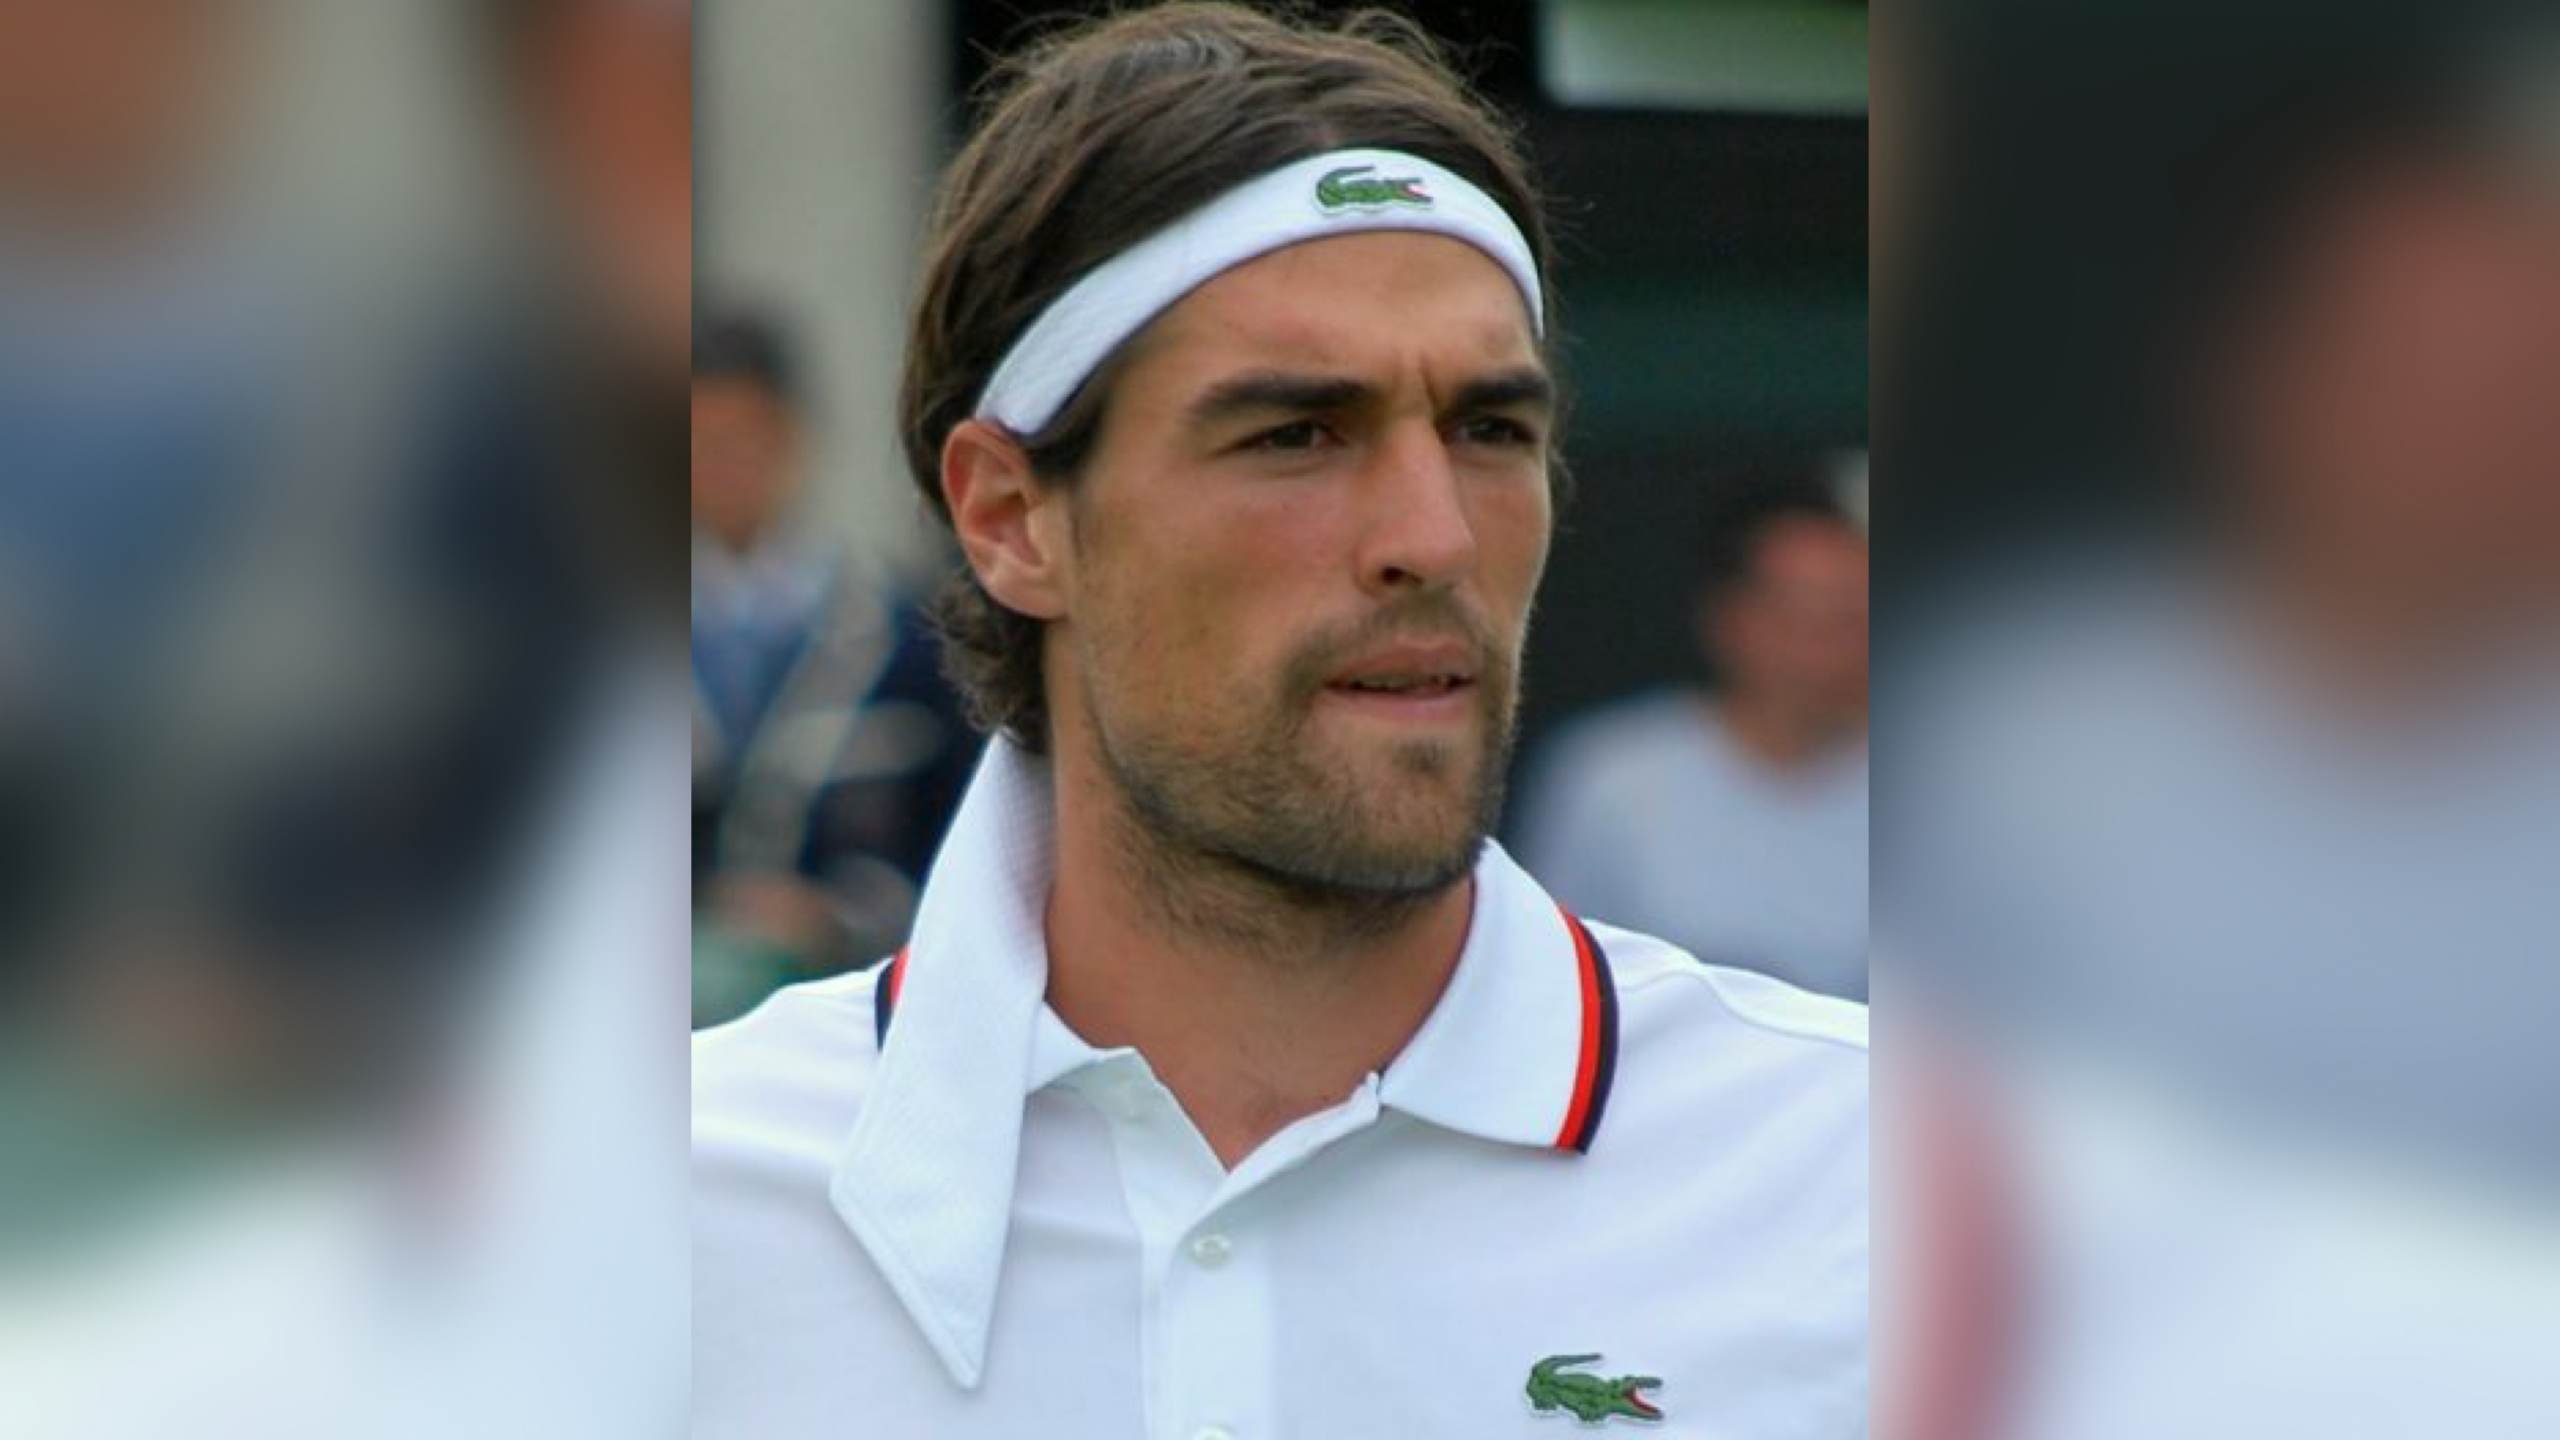 Tennis Star Says His Season is Over after Taking COVID Vaccine a Few Weeks Ago